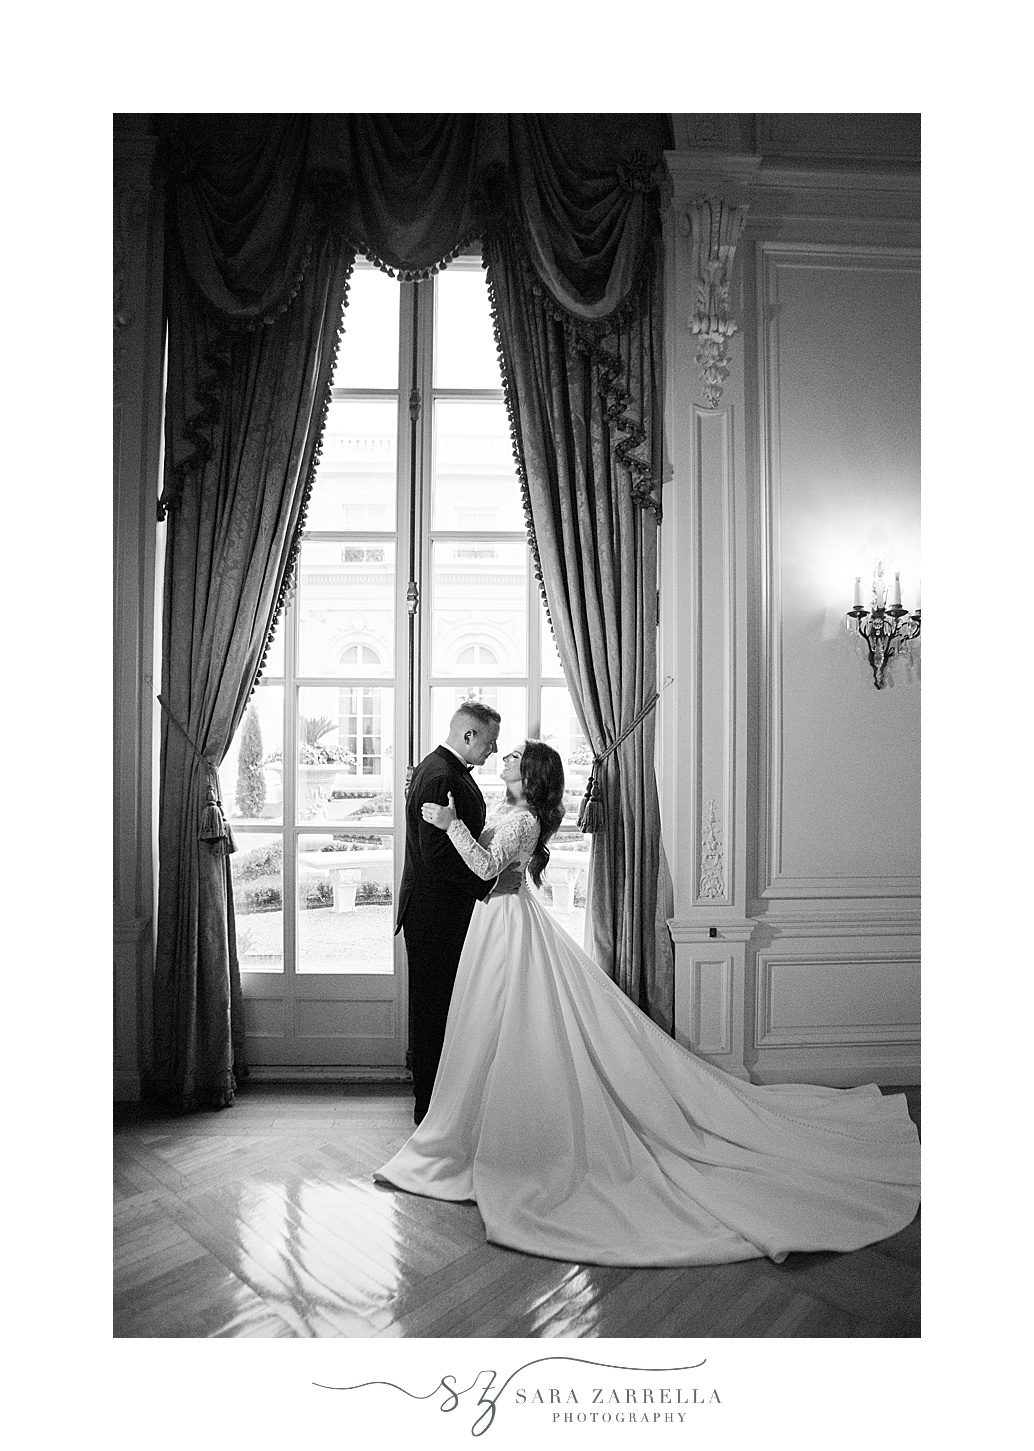 newlyweds hug in front of windows with bride's skirt draped behind her